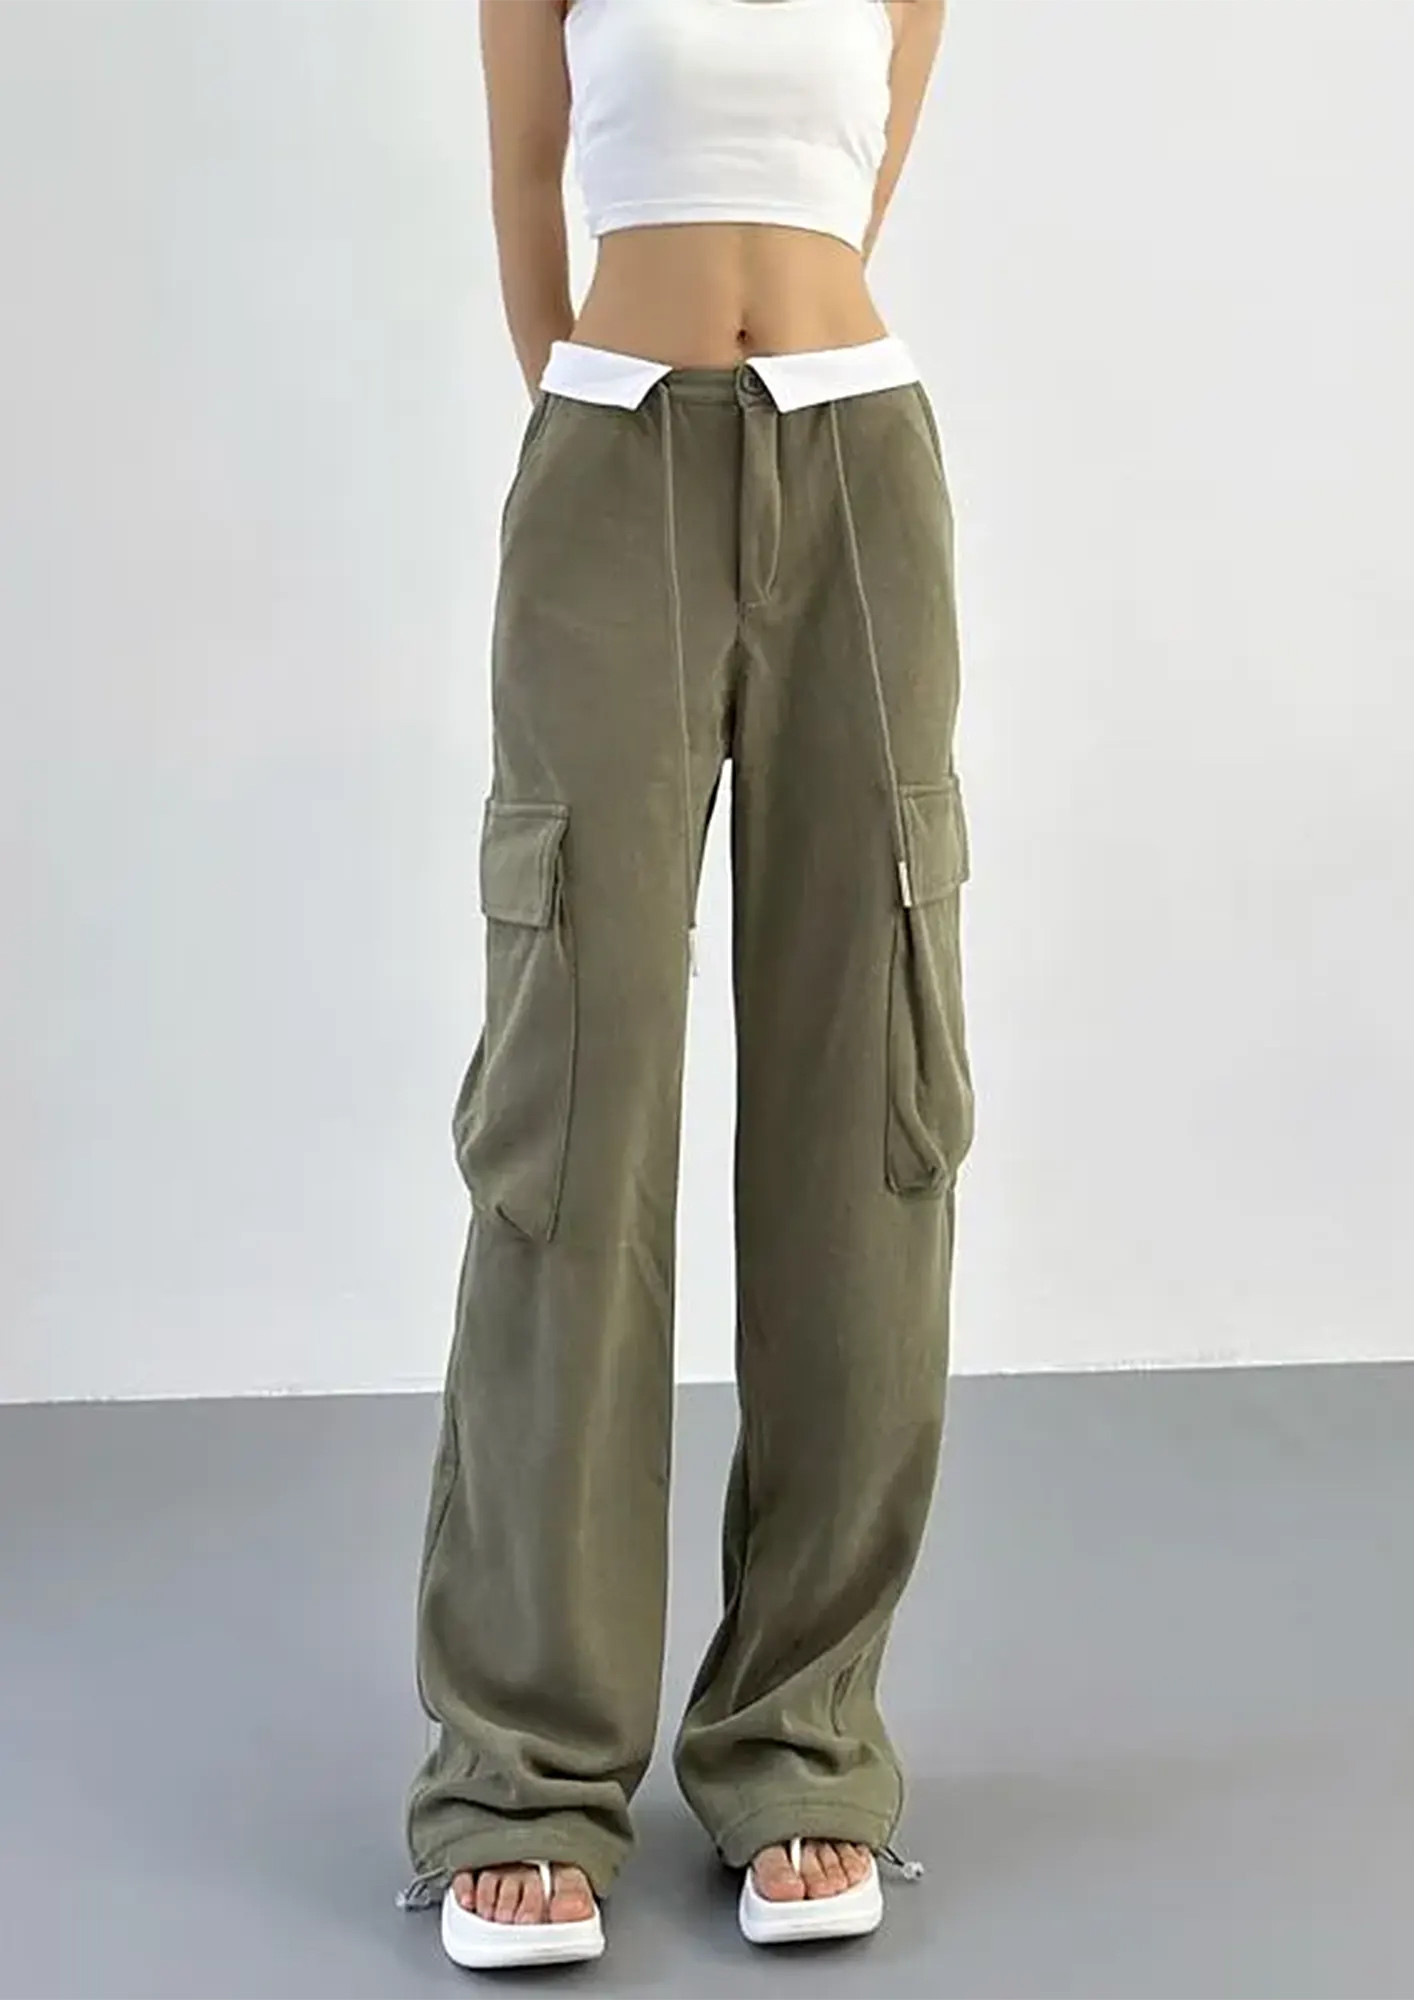 Lioness Miami Vice Pant Green – Universal Store